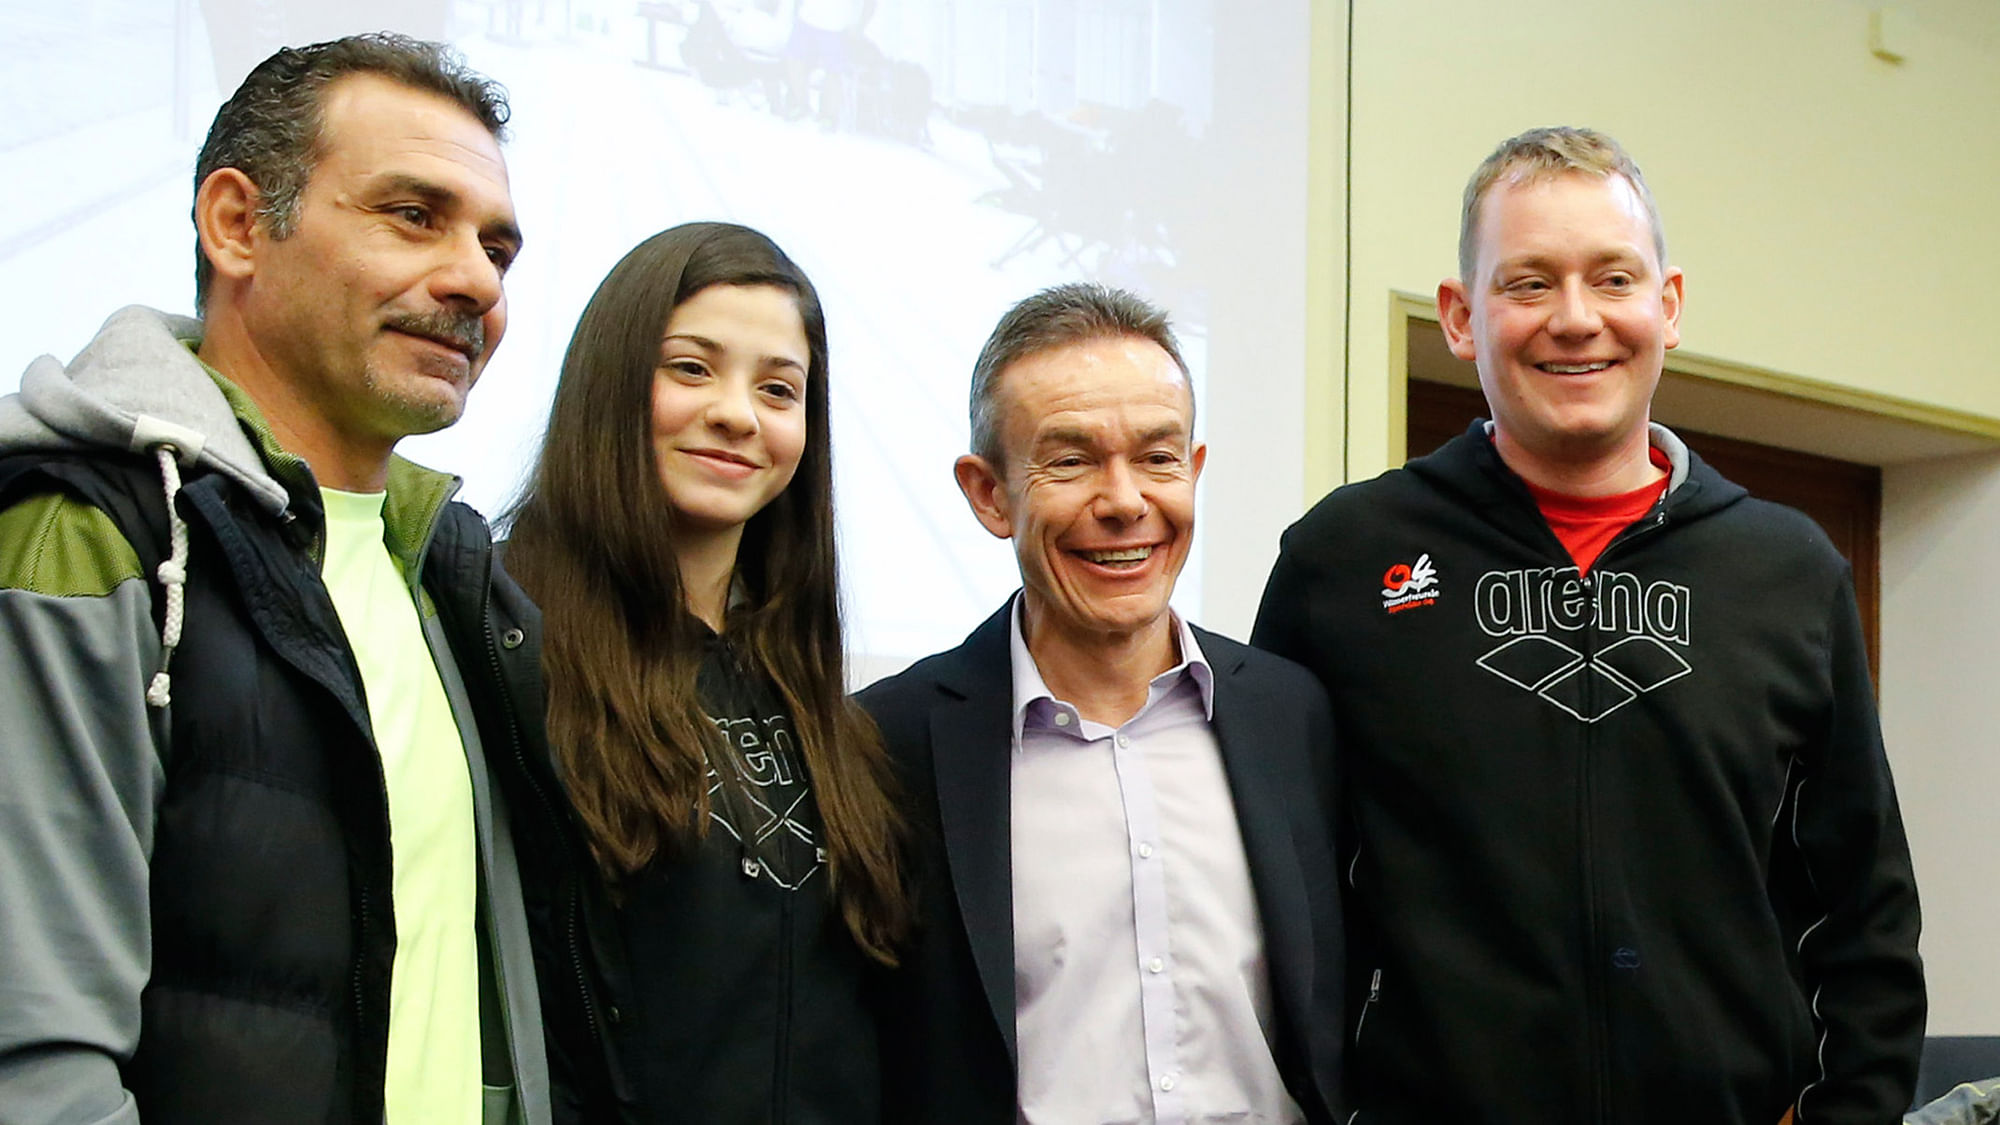 Syrian swimmer Yusra Mardini, her father Izzet (left) Pere Miro (2nd right) Deputy Director General for Relations with the Olympic Movement at the International Olympic Committee (IOC) and coach Sven Spannekrebs (right) of Wasserfreunde Spandau 04  in Berlin, Germany. (Photo: Reuters/Fabrizio Bensch)